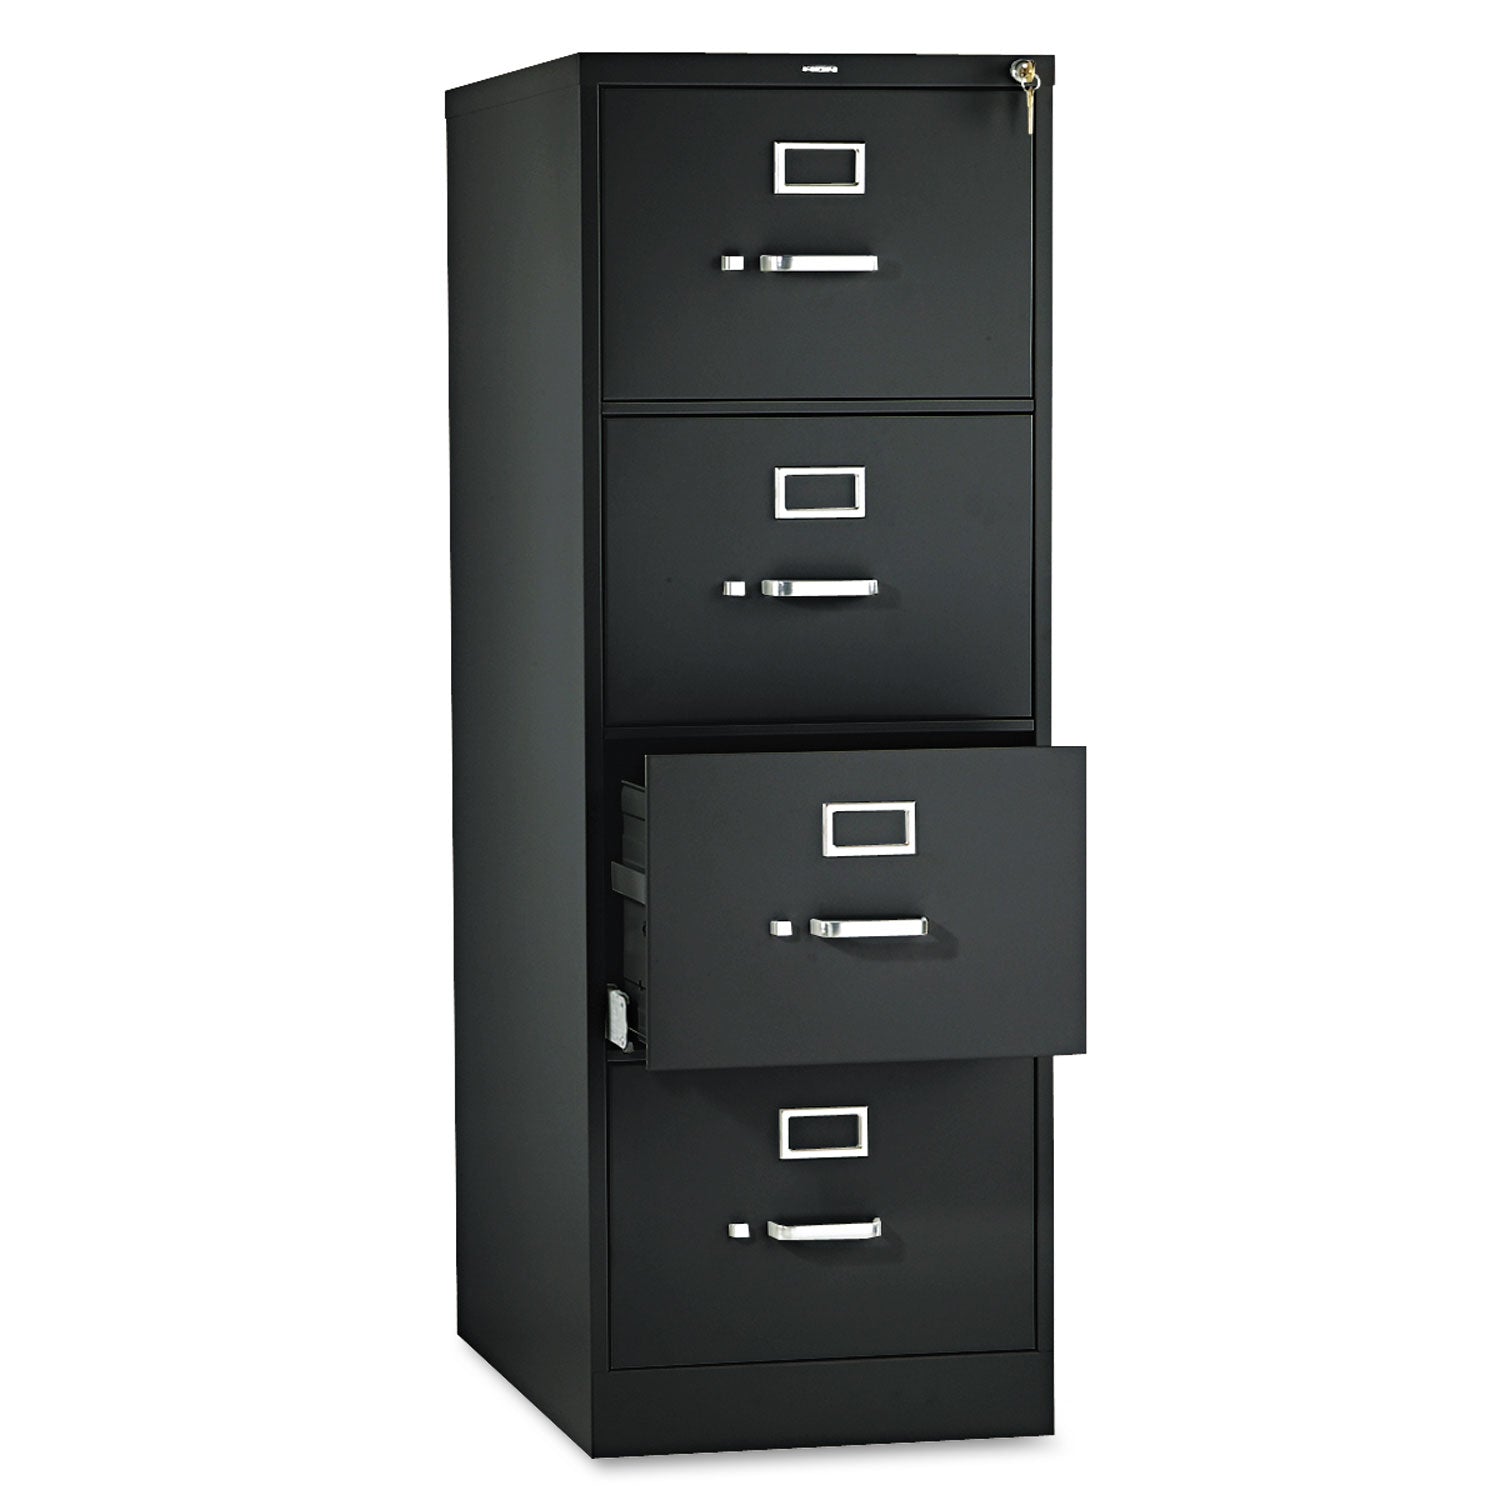 510-series-vertical-file-4-legal-size-file-drawers-black-1825-x-25-x-52_hon514cpp - 1